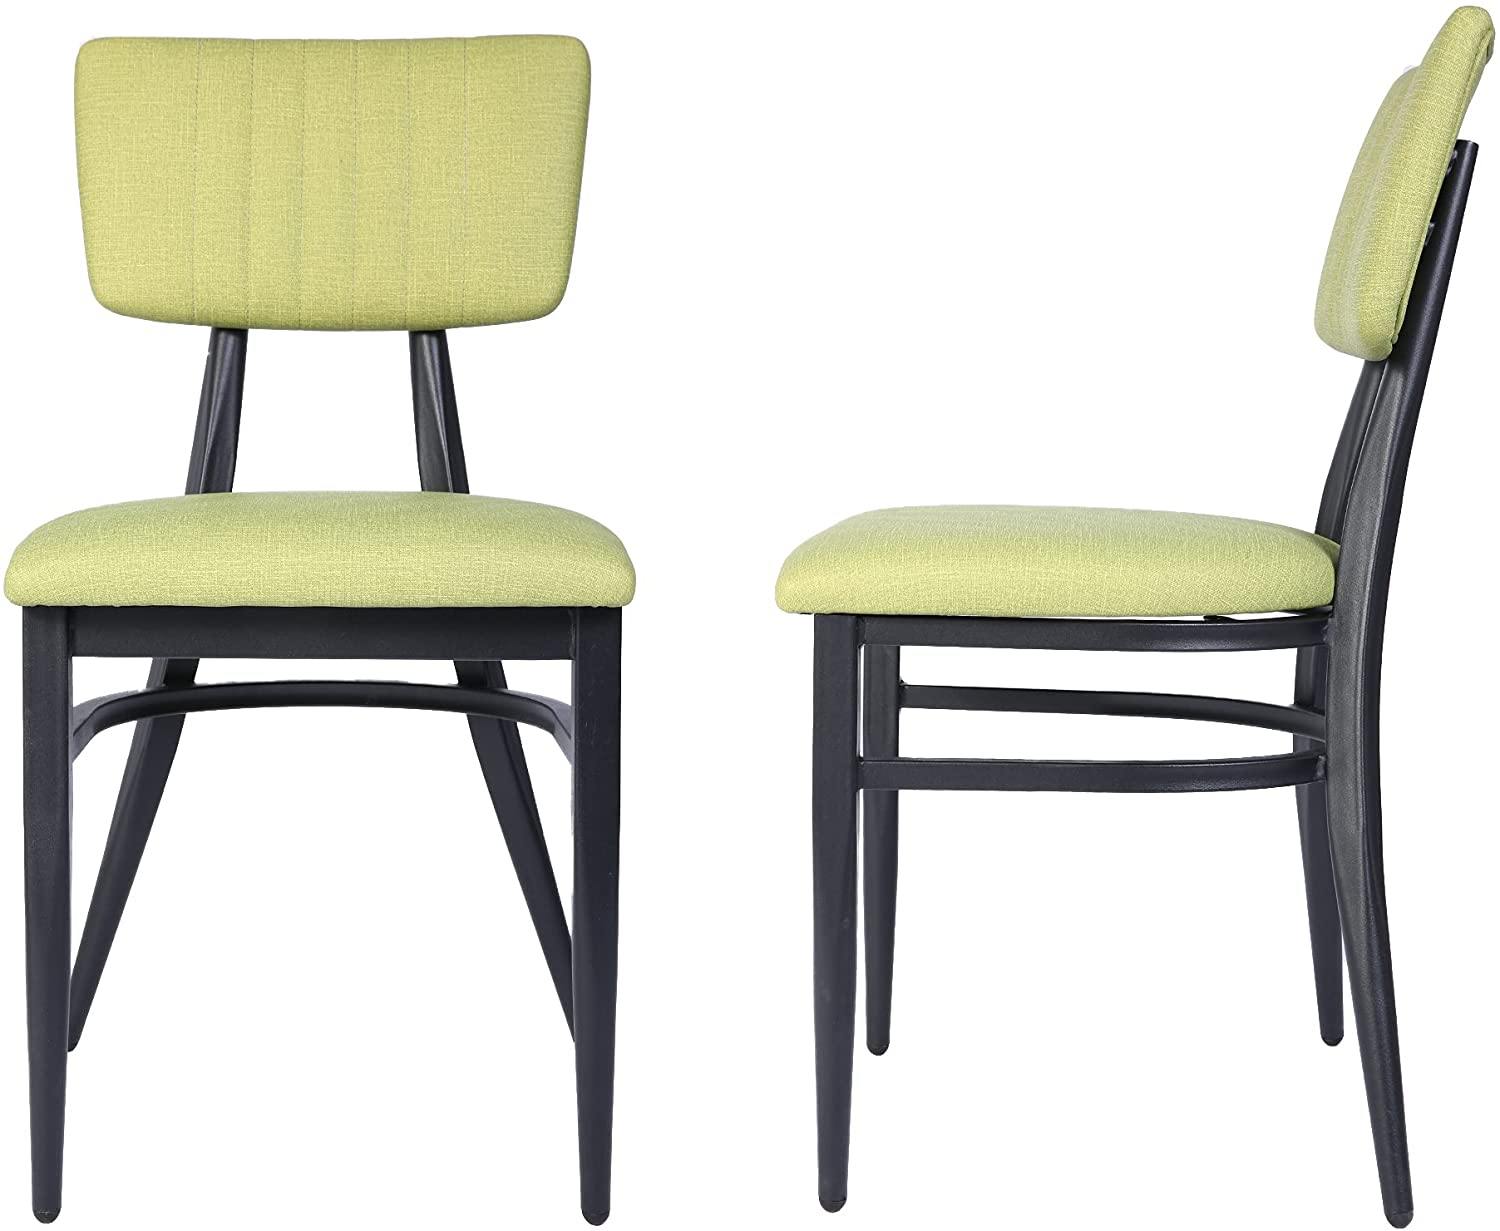 Mid-Century Set of 2 Modern Dining Room Chair with Cushion Metal Frame Classy Kitchen Side Chair for Pub Coffee Shop Bistro, Green - Bosonshop